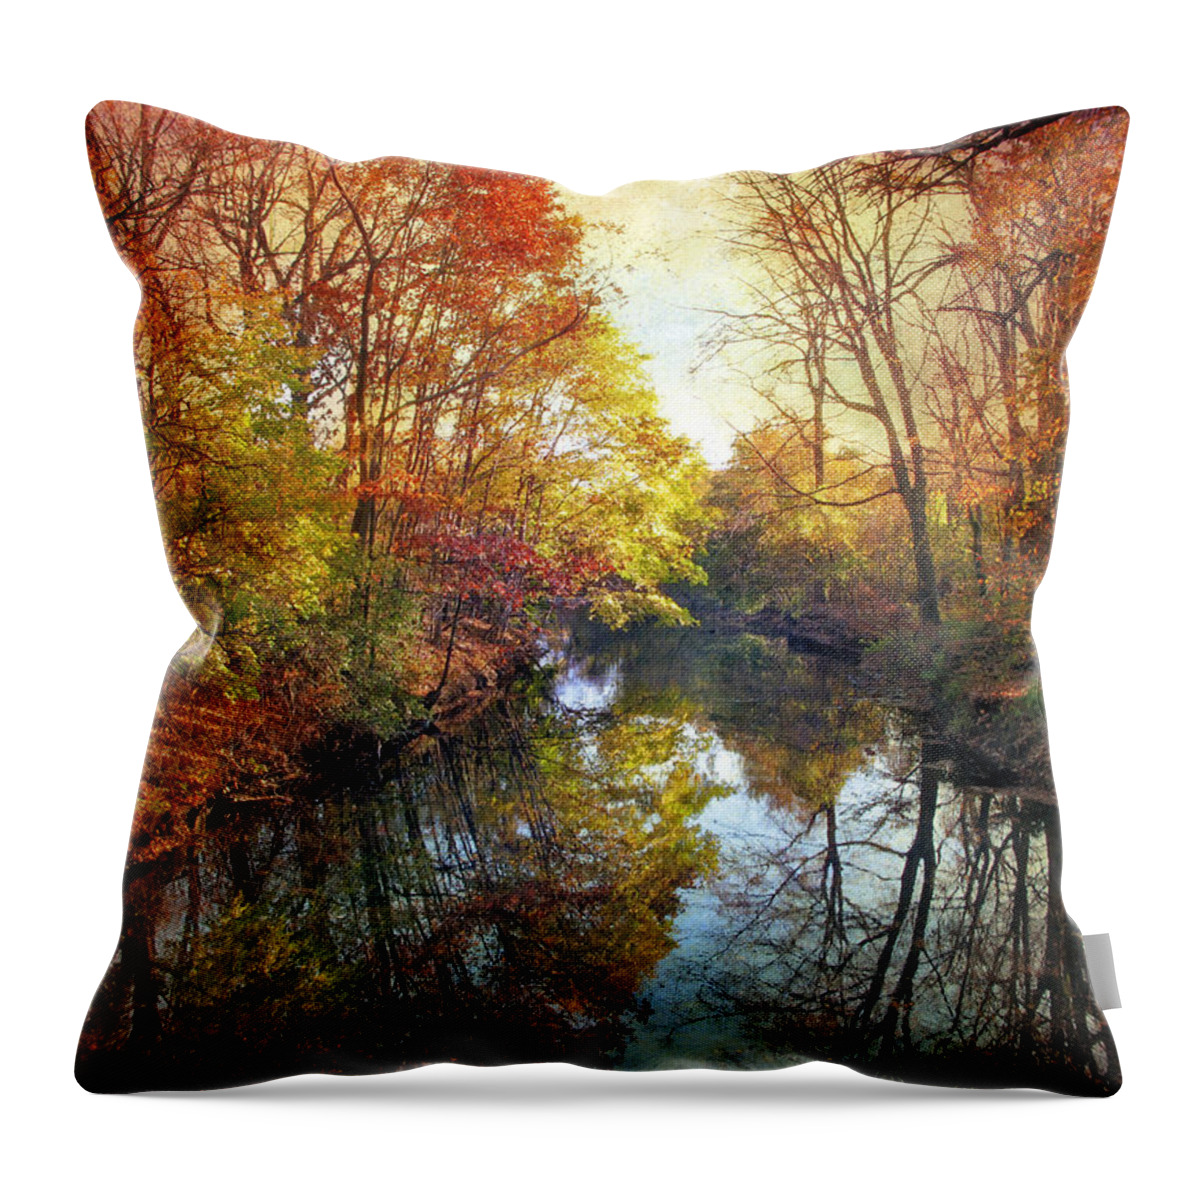 Riverbank Throw Pillow featuring the photograph Ode to Autumn by Jessica Jenney